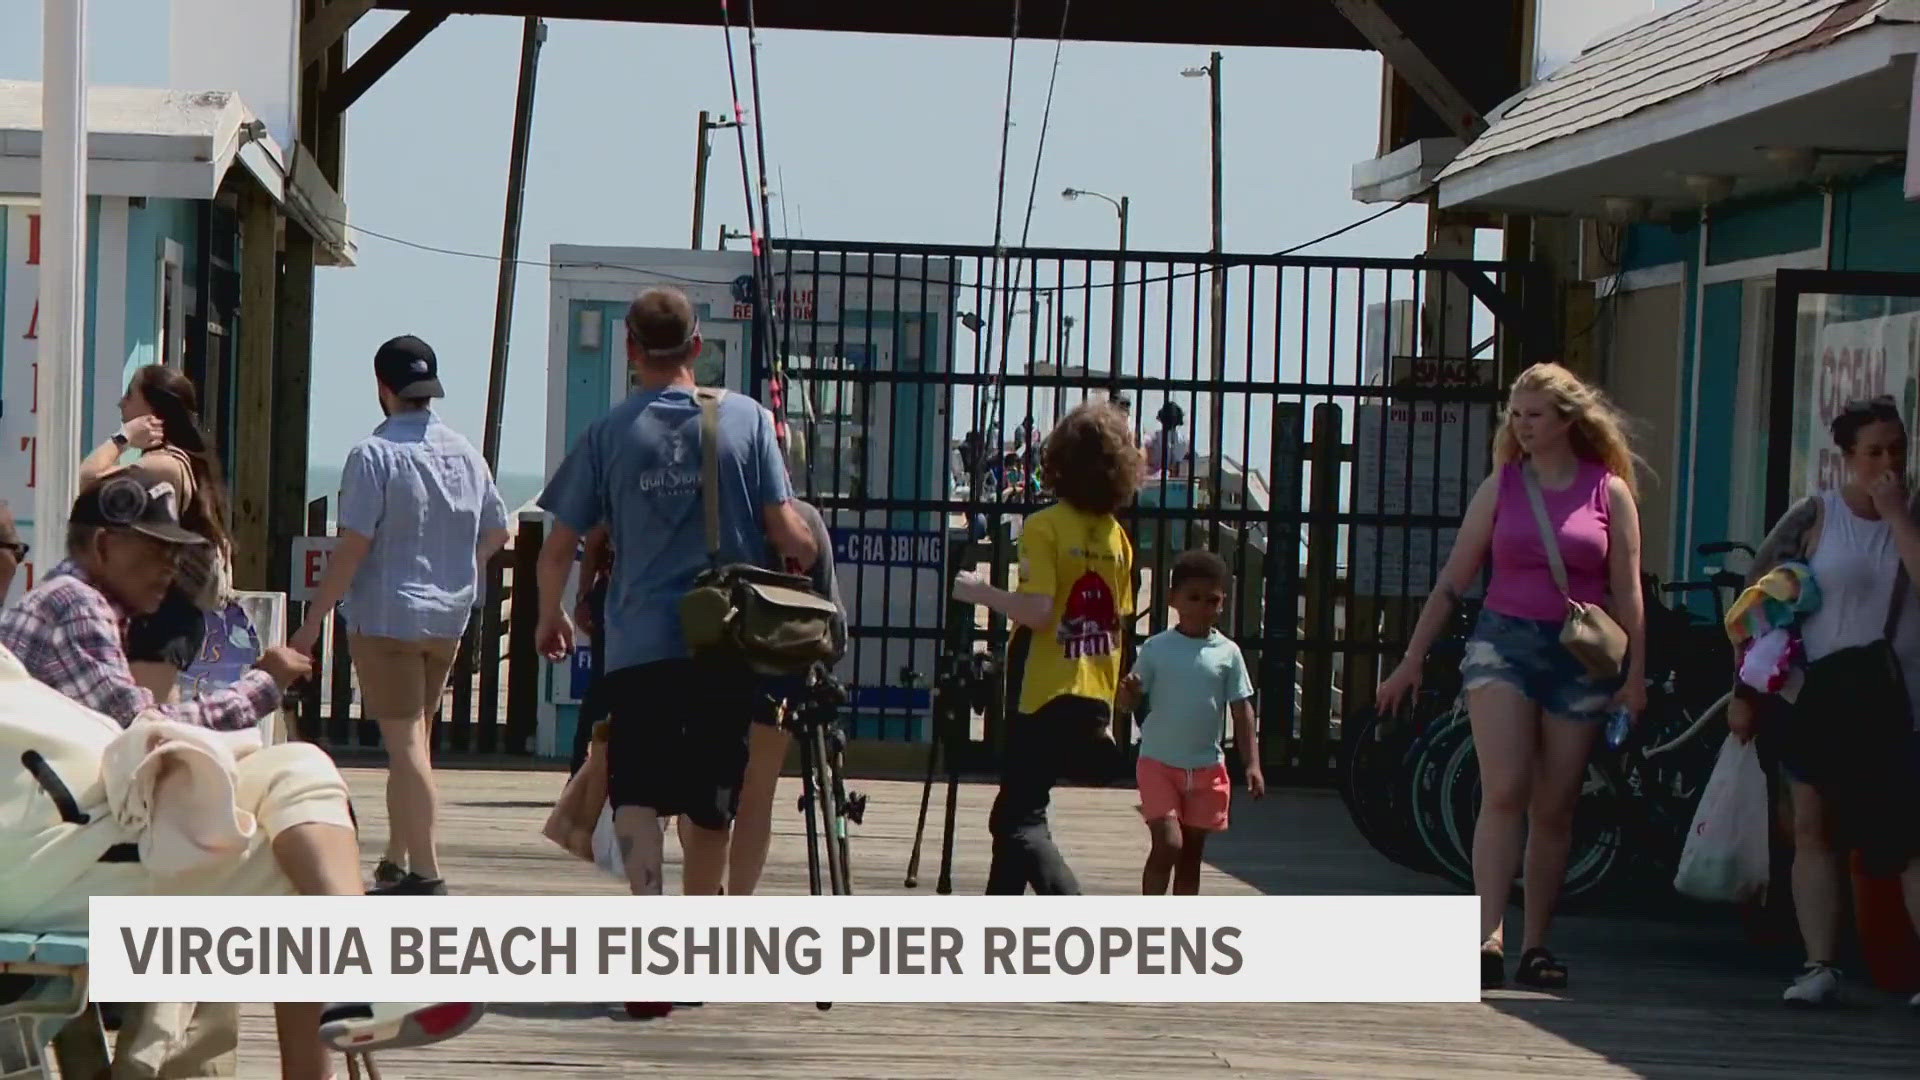 The pier was initially set to reopen on April 1st but a spokesperson said rain slowed down the repairs.